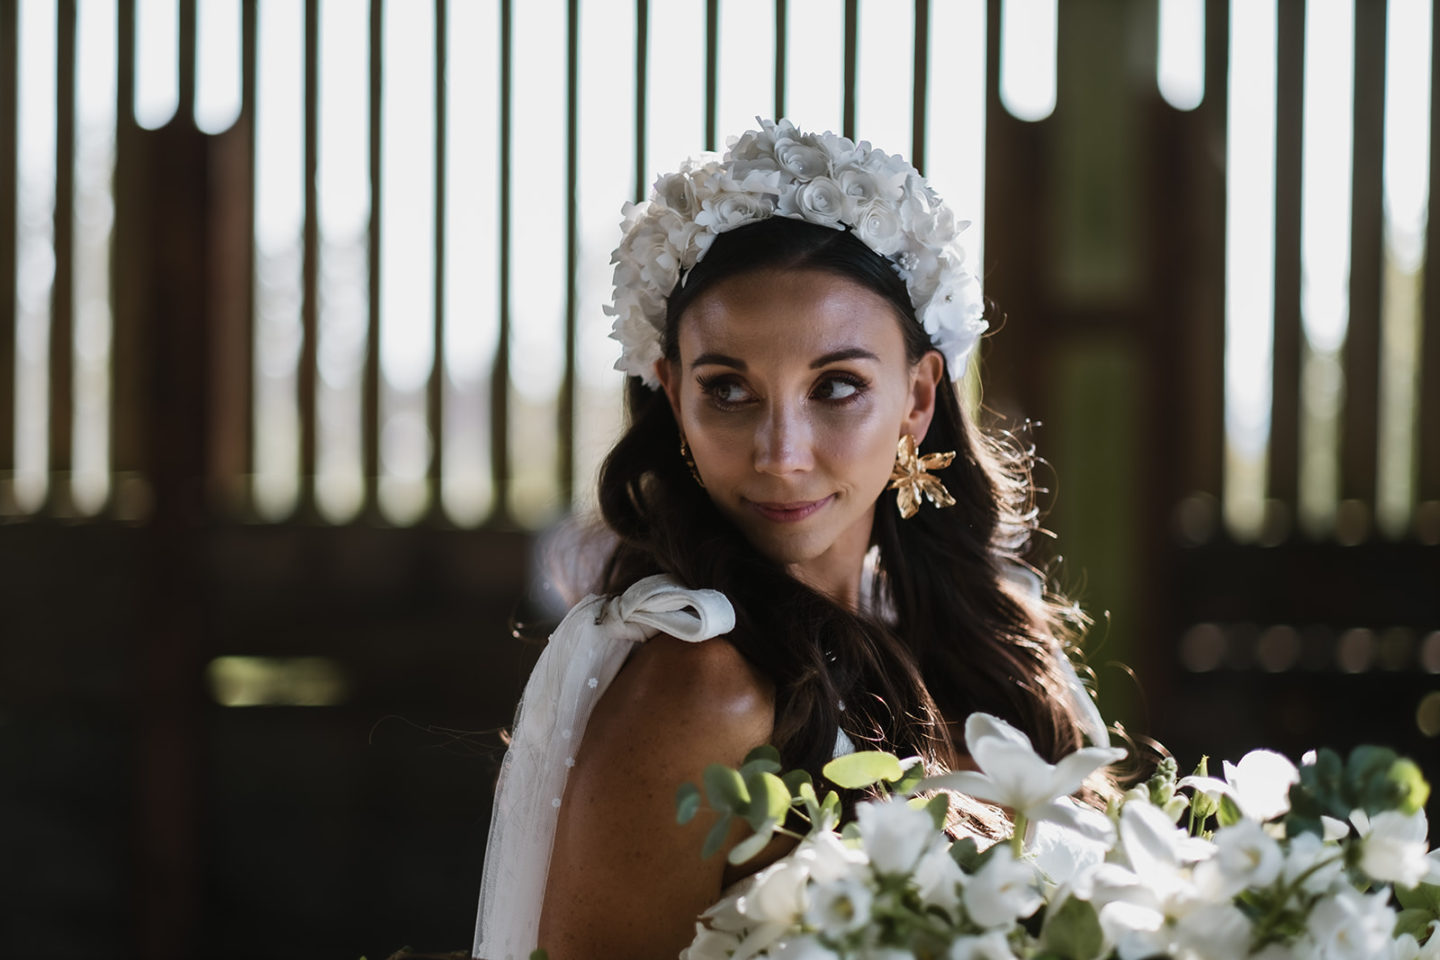 Intimate Wedding With Gold and Green Luxury Styling At Hendall Manor Barns, Sussex